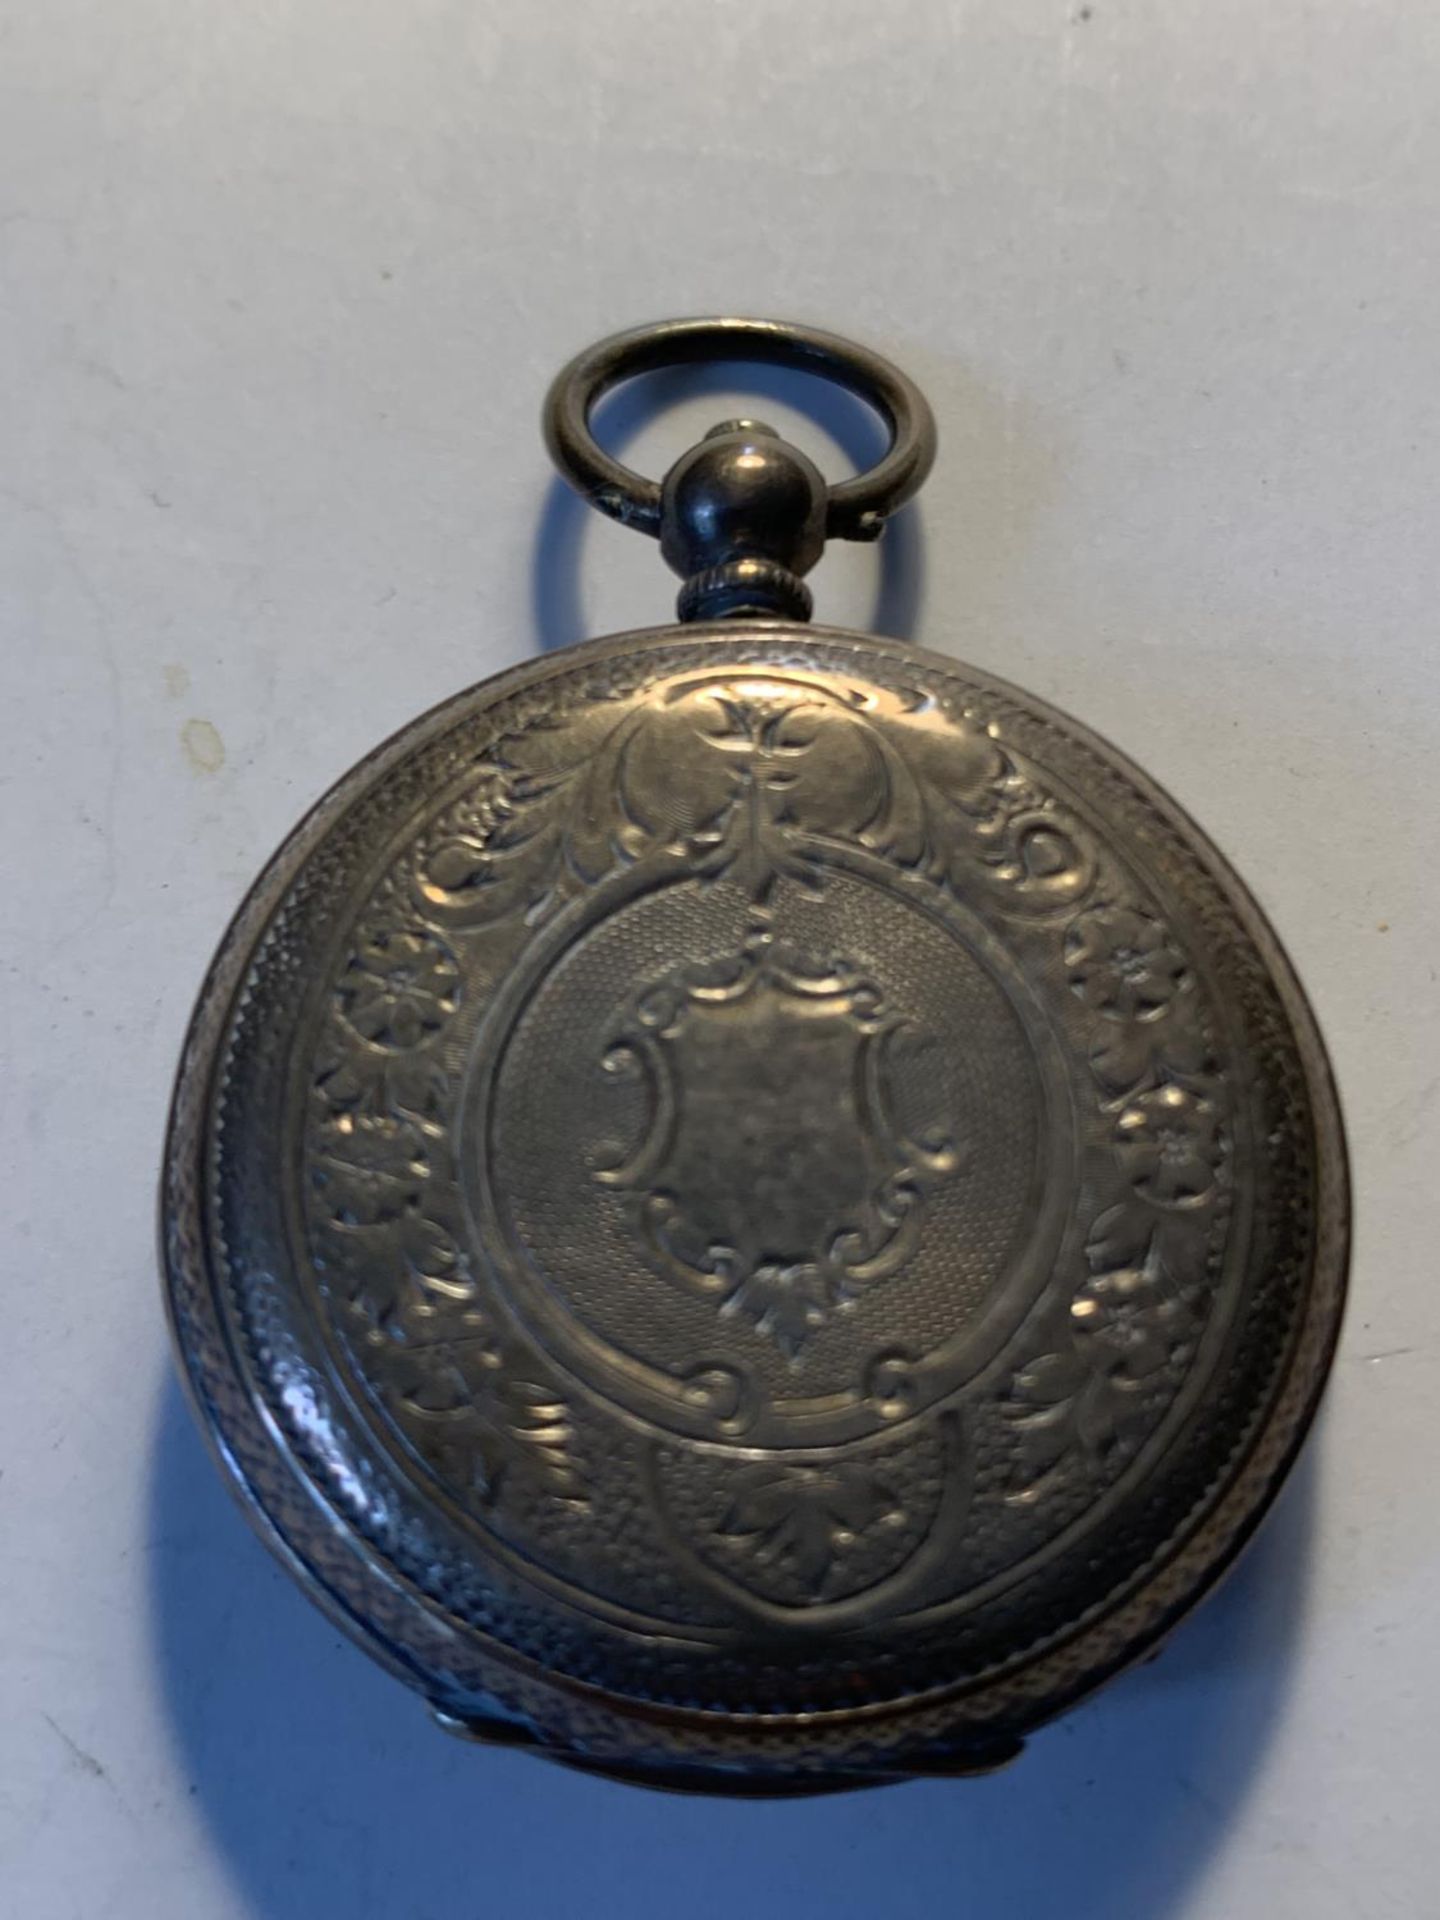 AN 800 SILVER POCKET WATCH WITH SUB DIAL, DECORATIVE WHITE ENAMEL FACE, ROMAN NUMERALS AND A KEY - Image 3 of 4